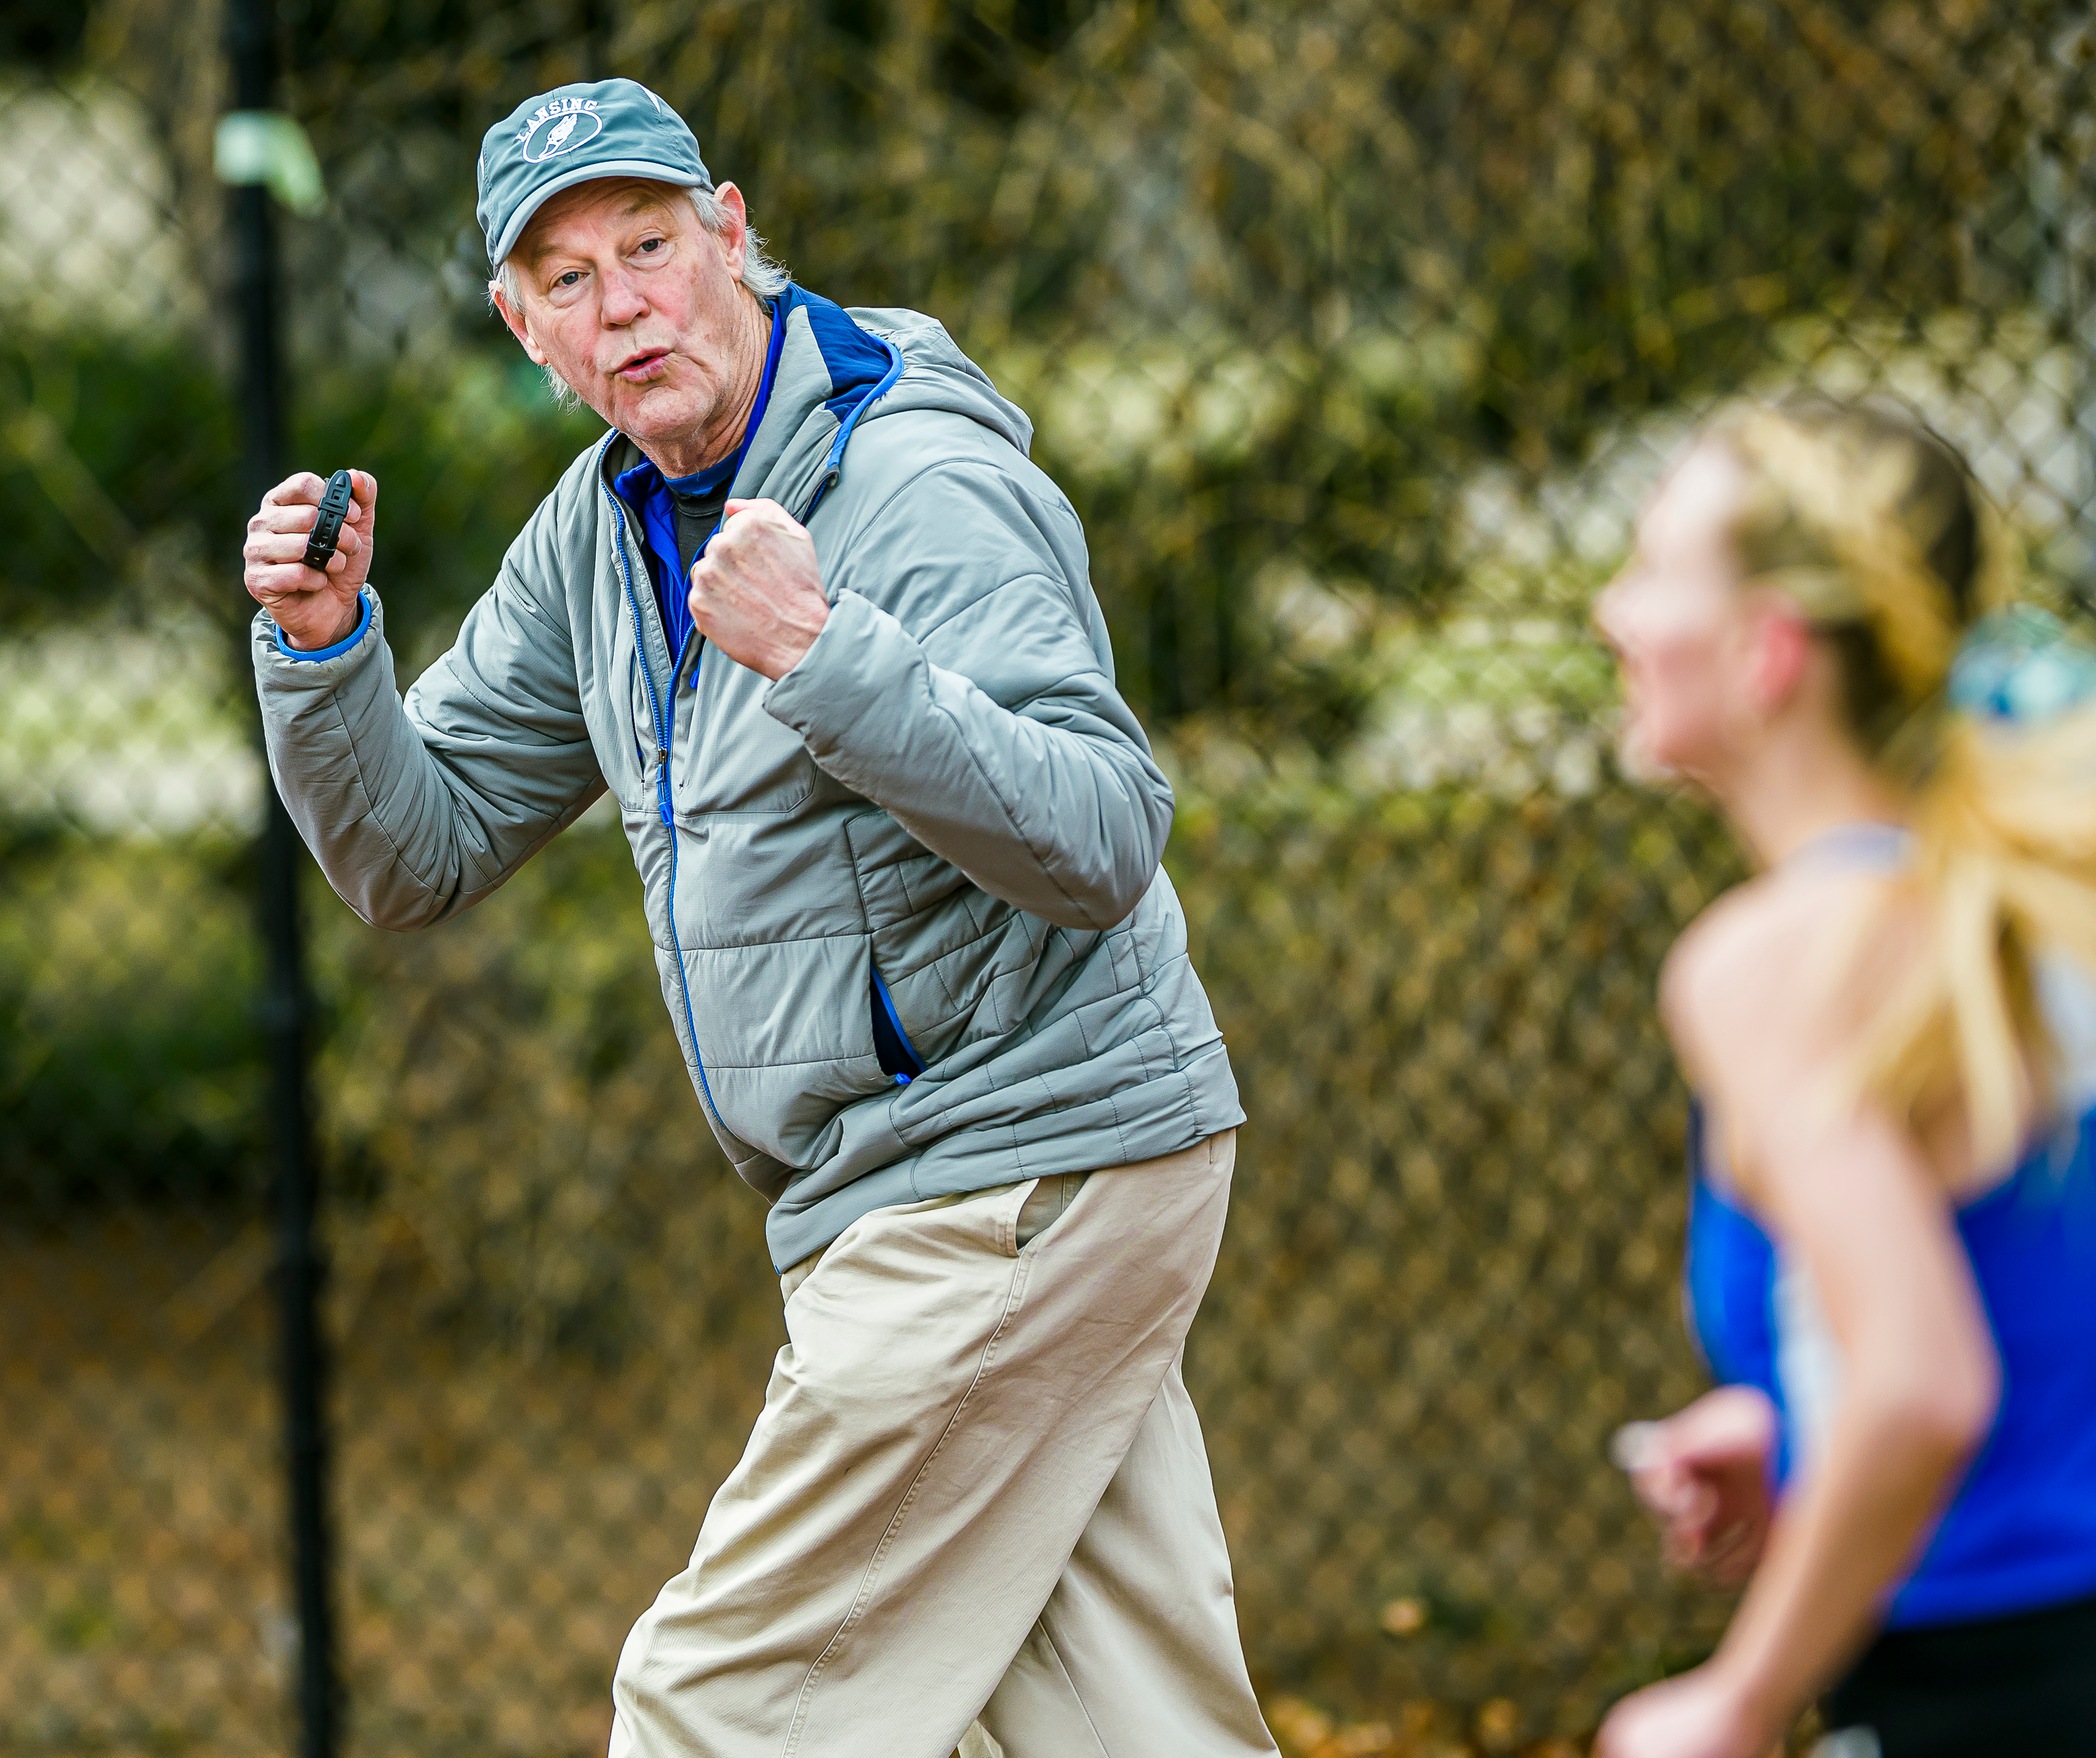 Jim Robinson wins Cross Country Coach of the Year